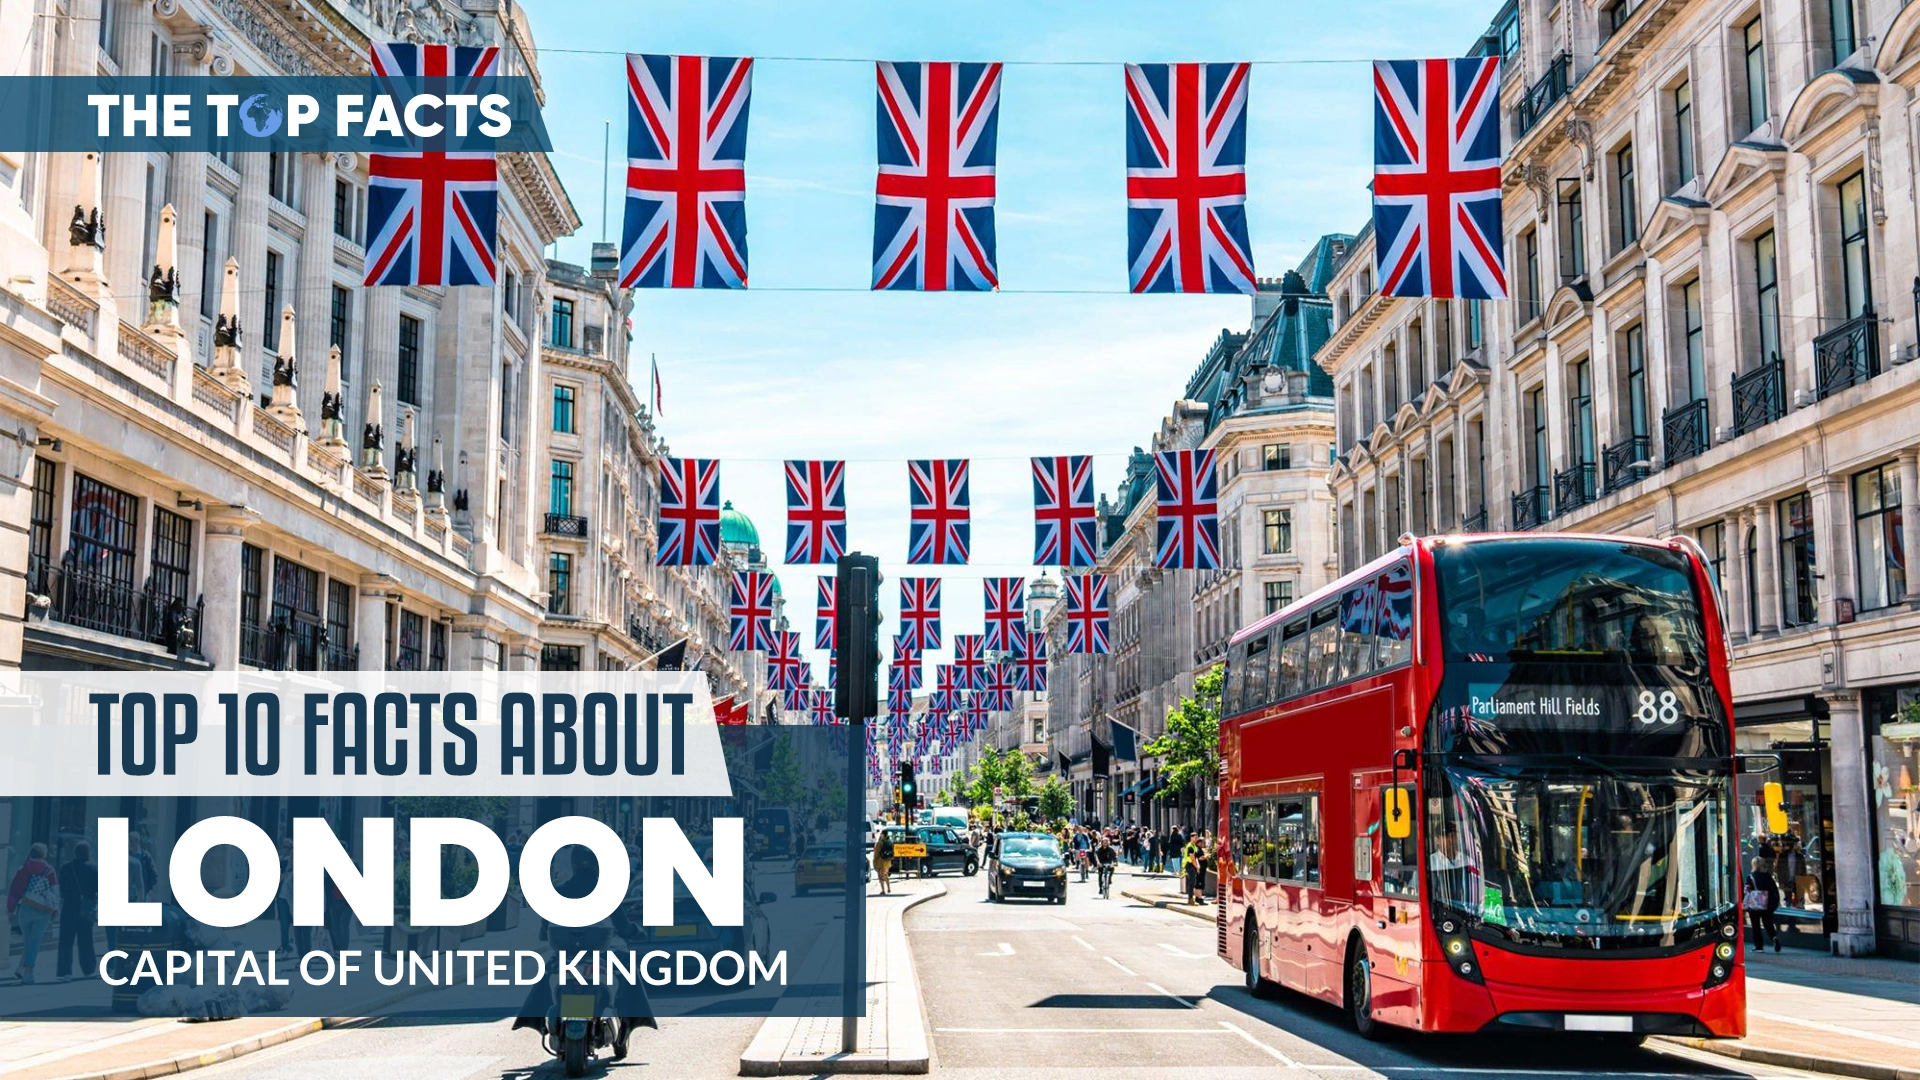 Top 10 Facts About London, the Capital of the United Kingdom